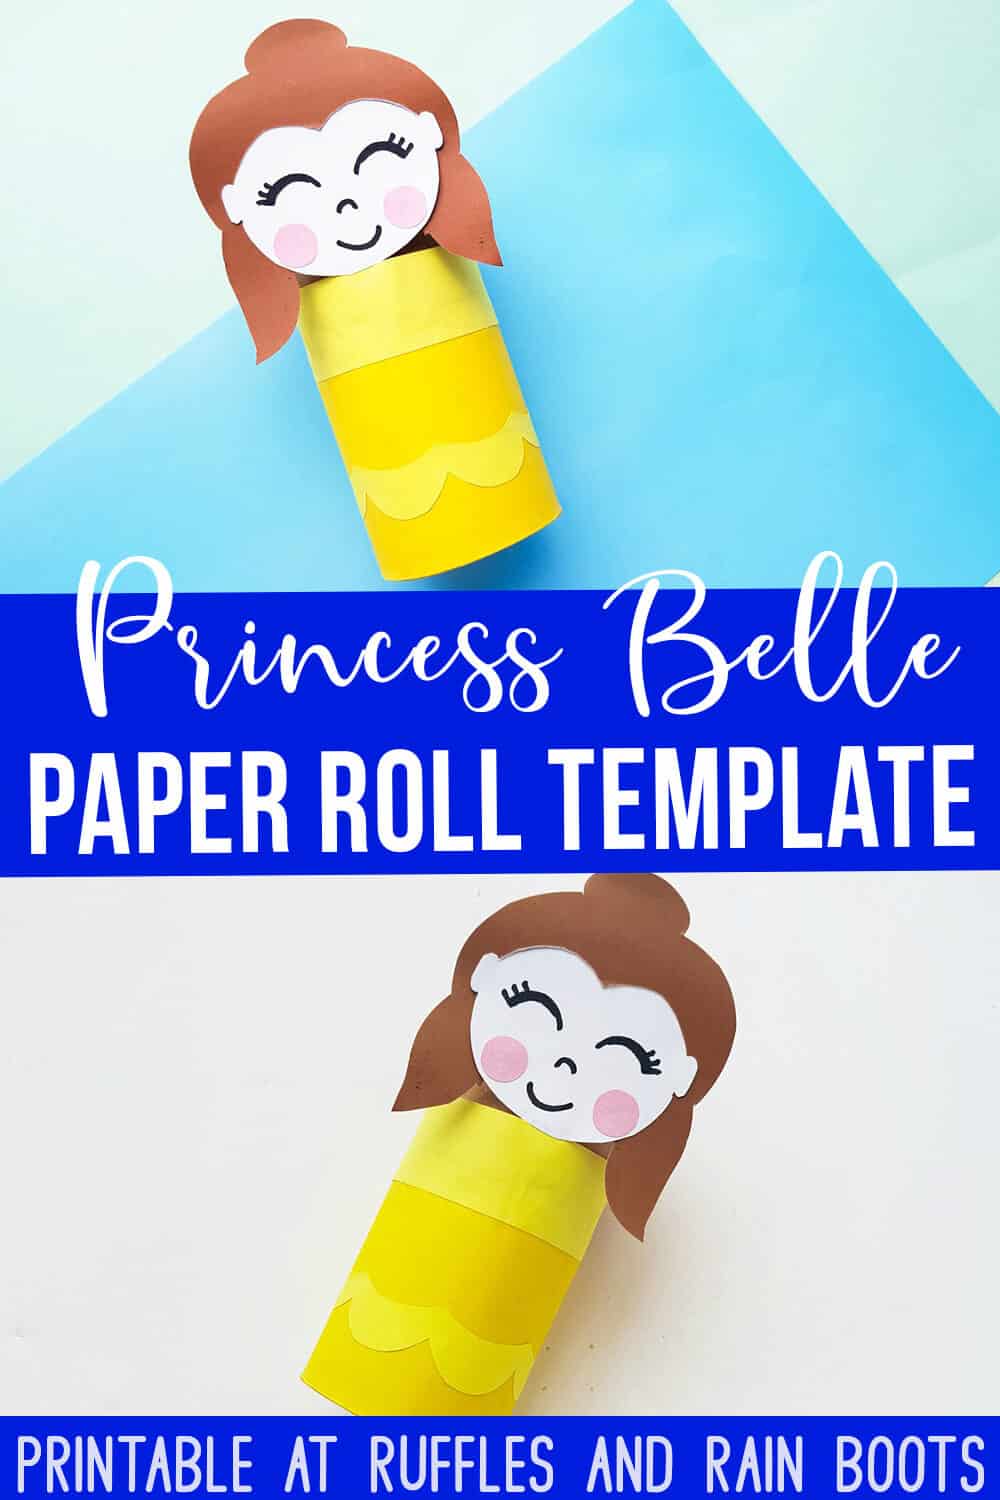 Princess Belle toilet paper roll craft on blue background with text which reads Princess Belle paper roll template